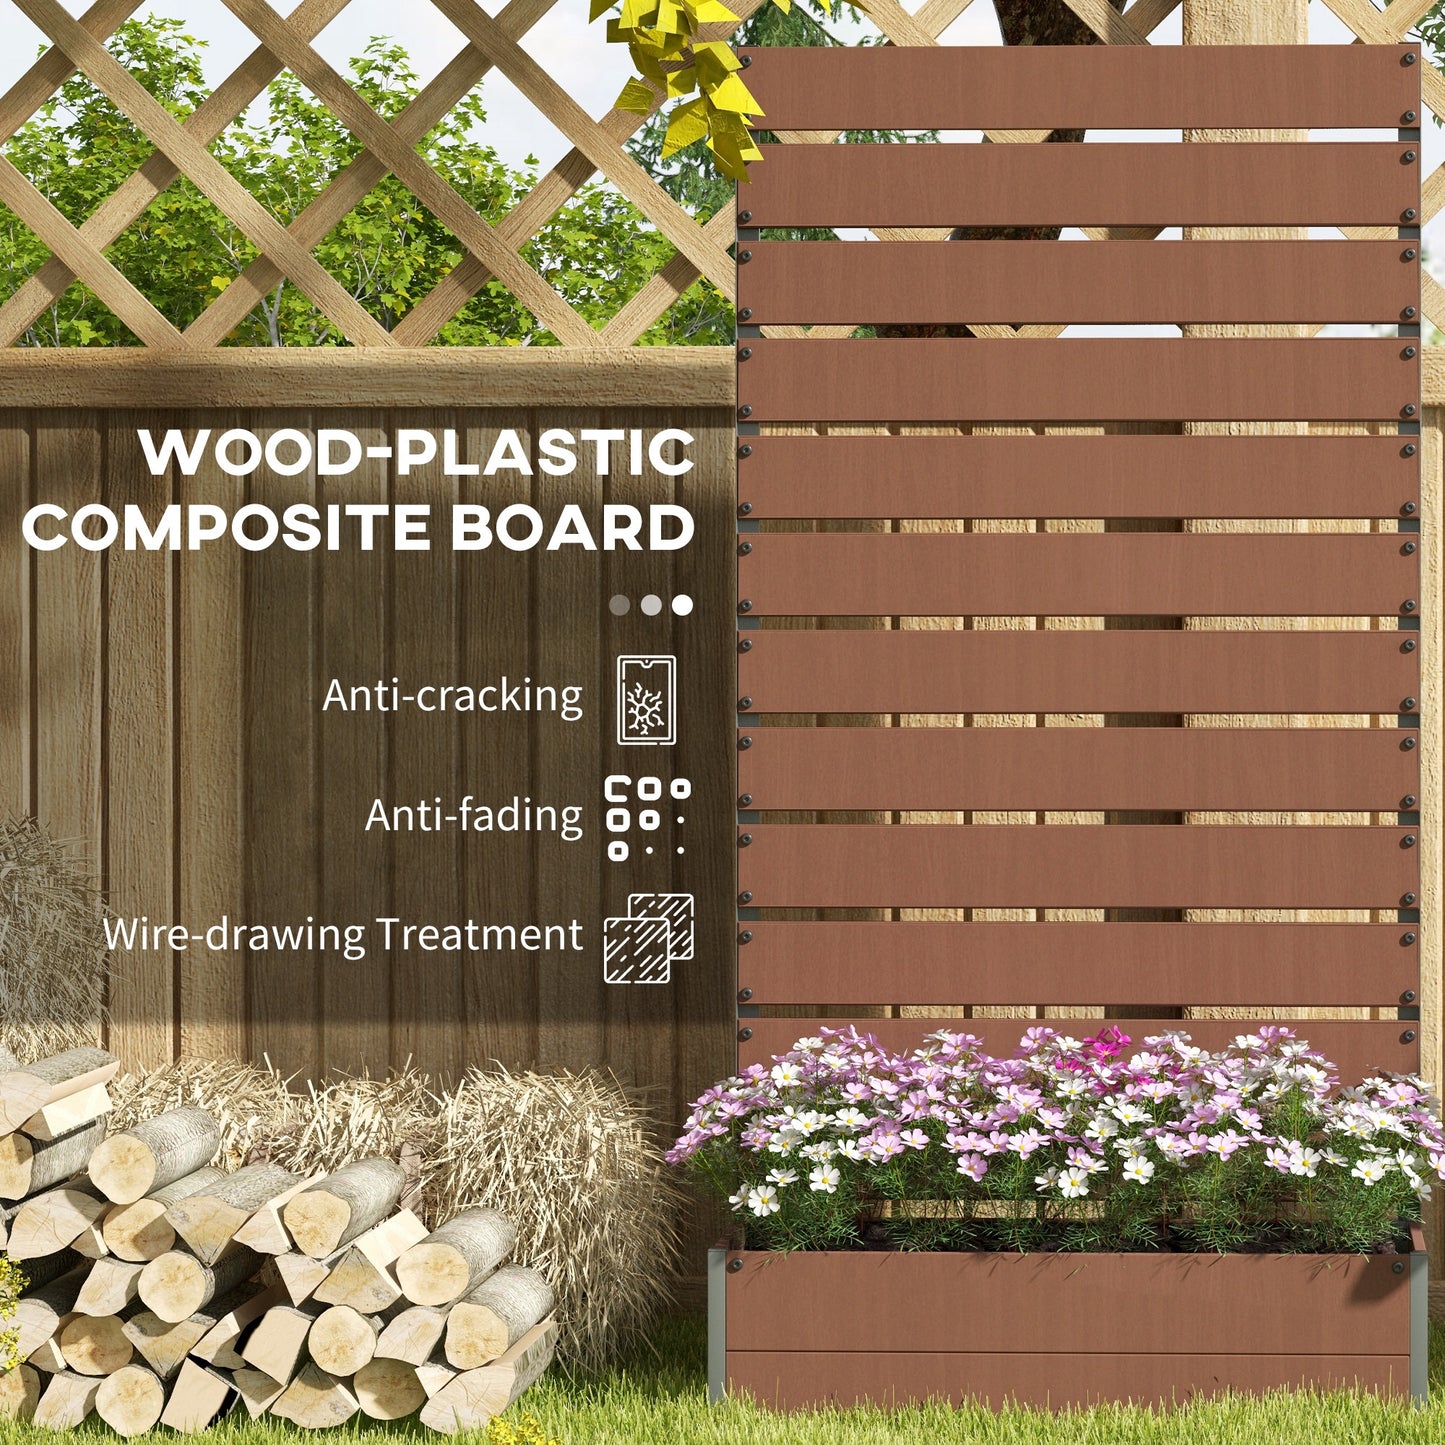 Outsunny Wood-plastic Composite Raised Planter with Climbing Trellis, 90.5L x 38W x 180H with Drainage Gap for Plants, Vines, Light Brown | Aosom UK